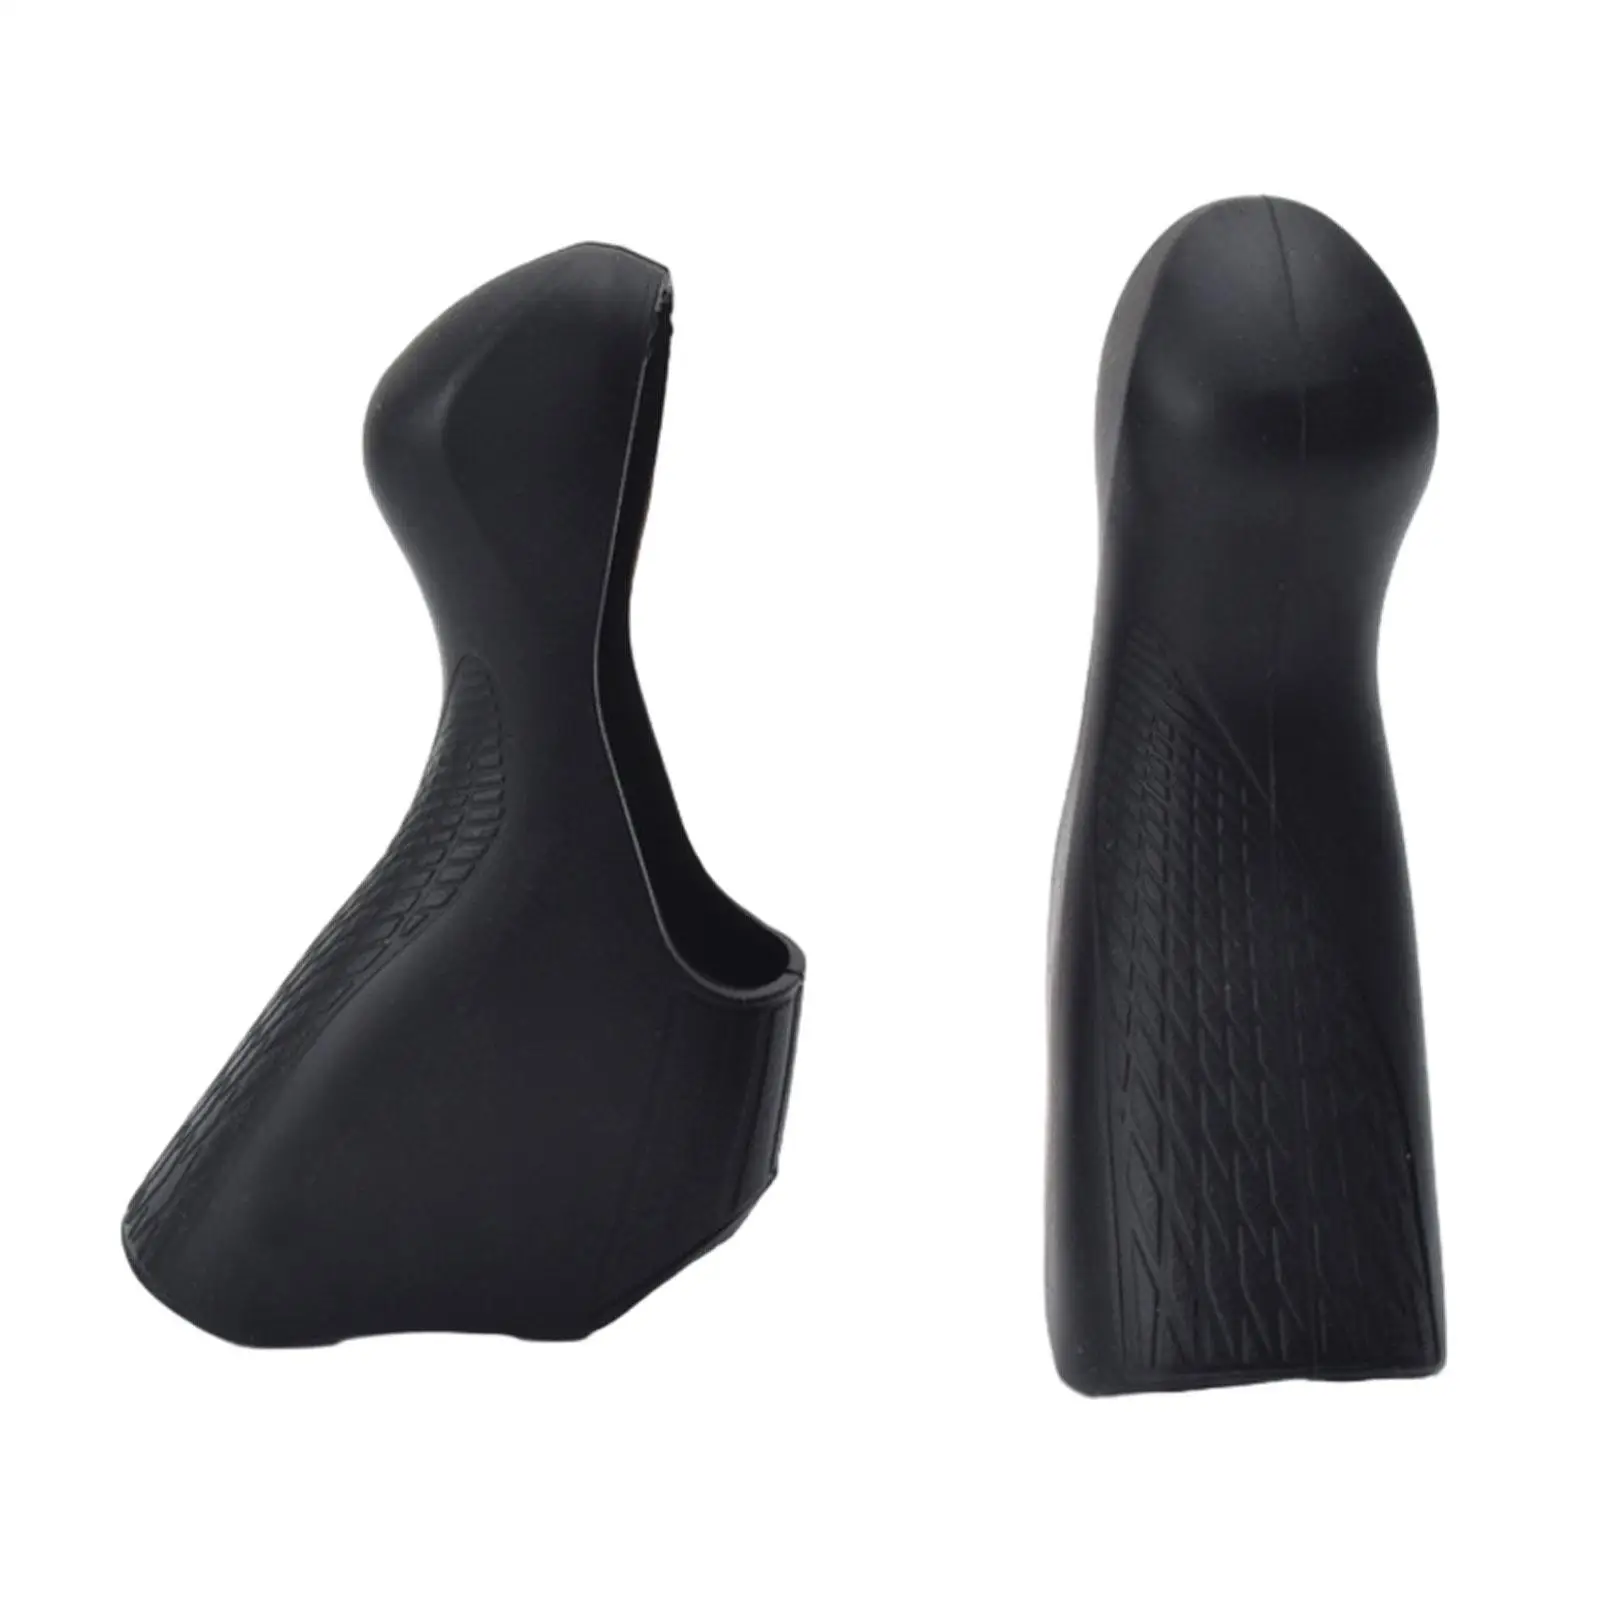 Bike Shifter Lever Cover, Road Bicycle Shifters Silicone Cover for Shifter Brake Lever Hood Cover